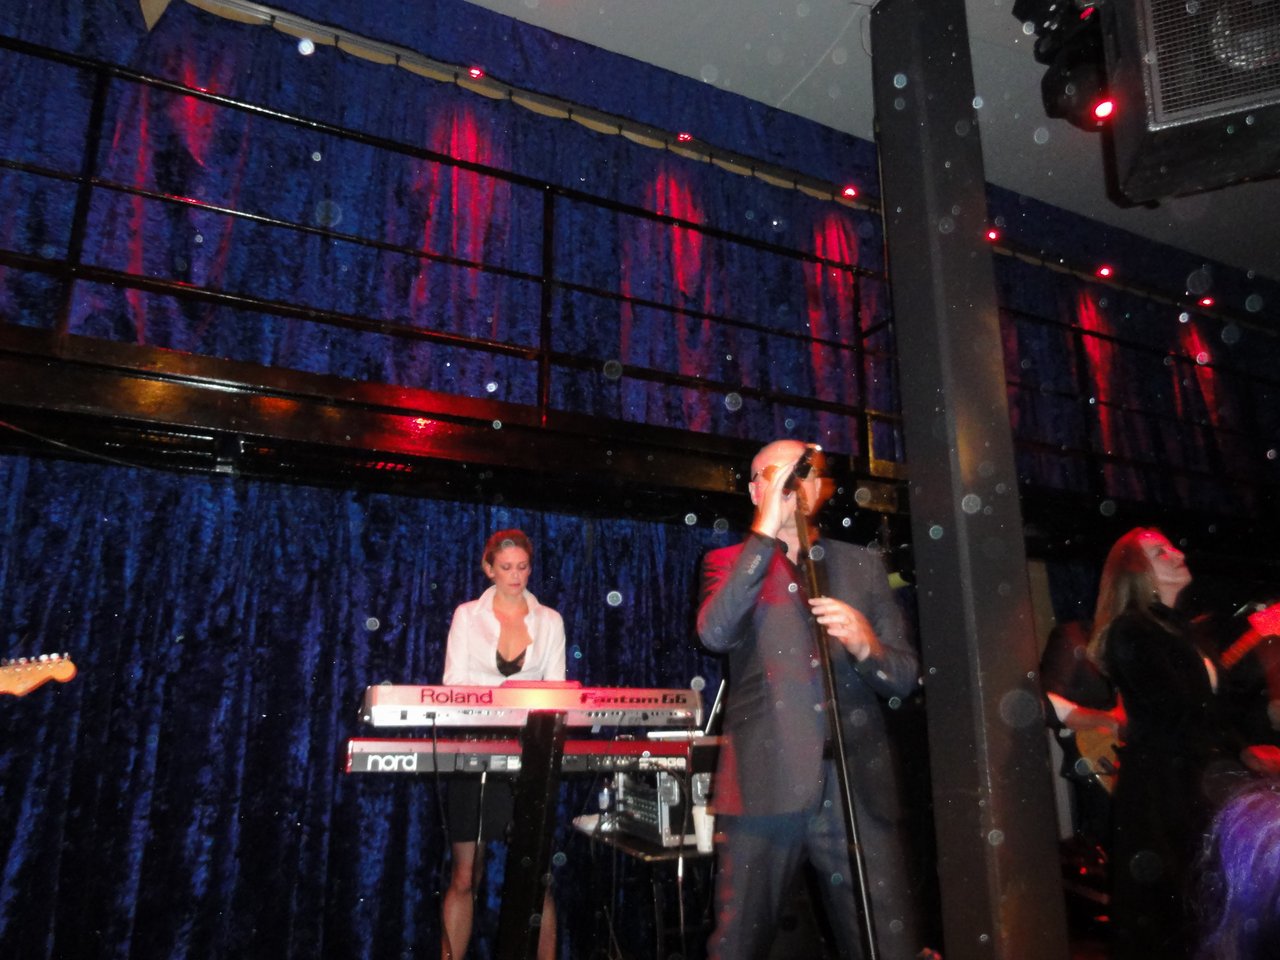 41 Heaven 17 at the Jazz Cafe Feb2014.jpg